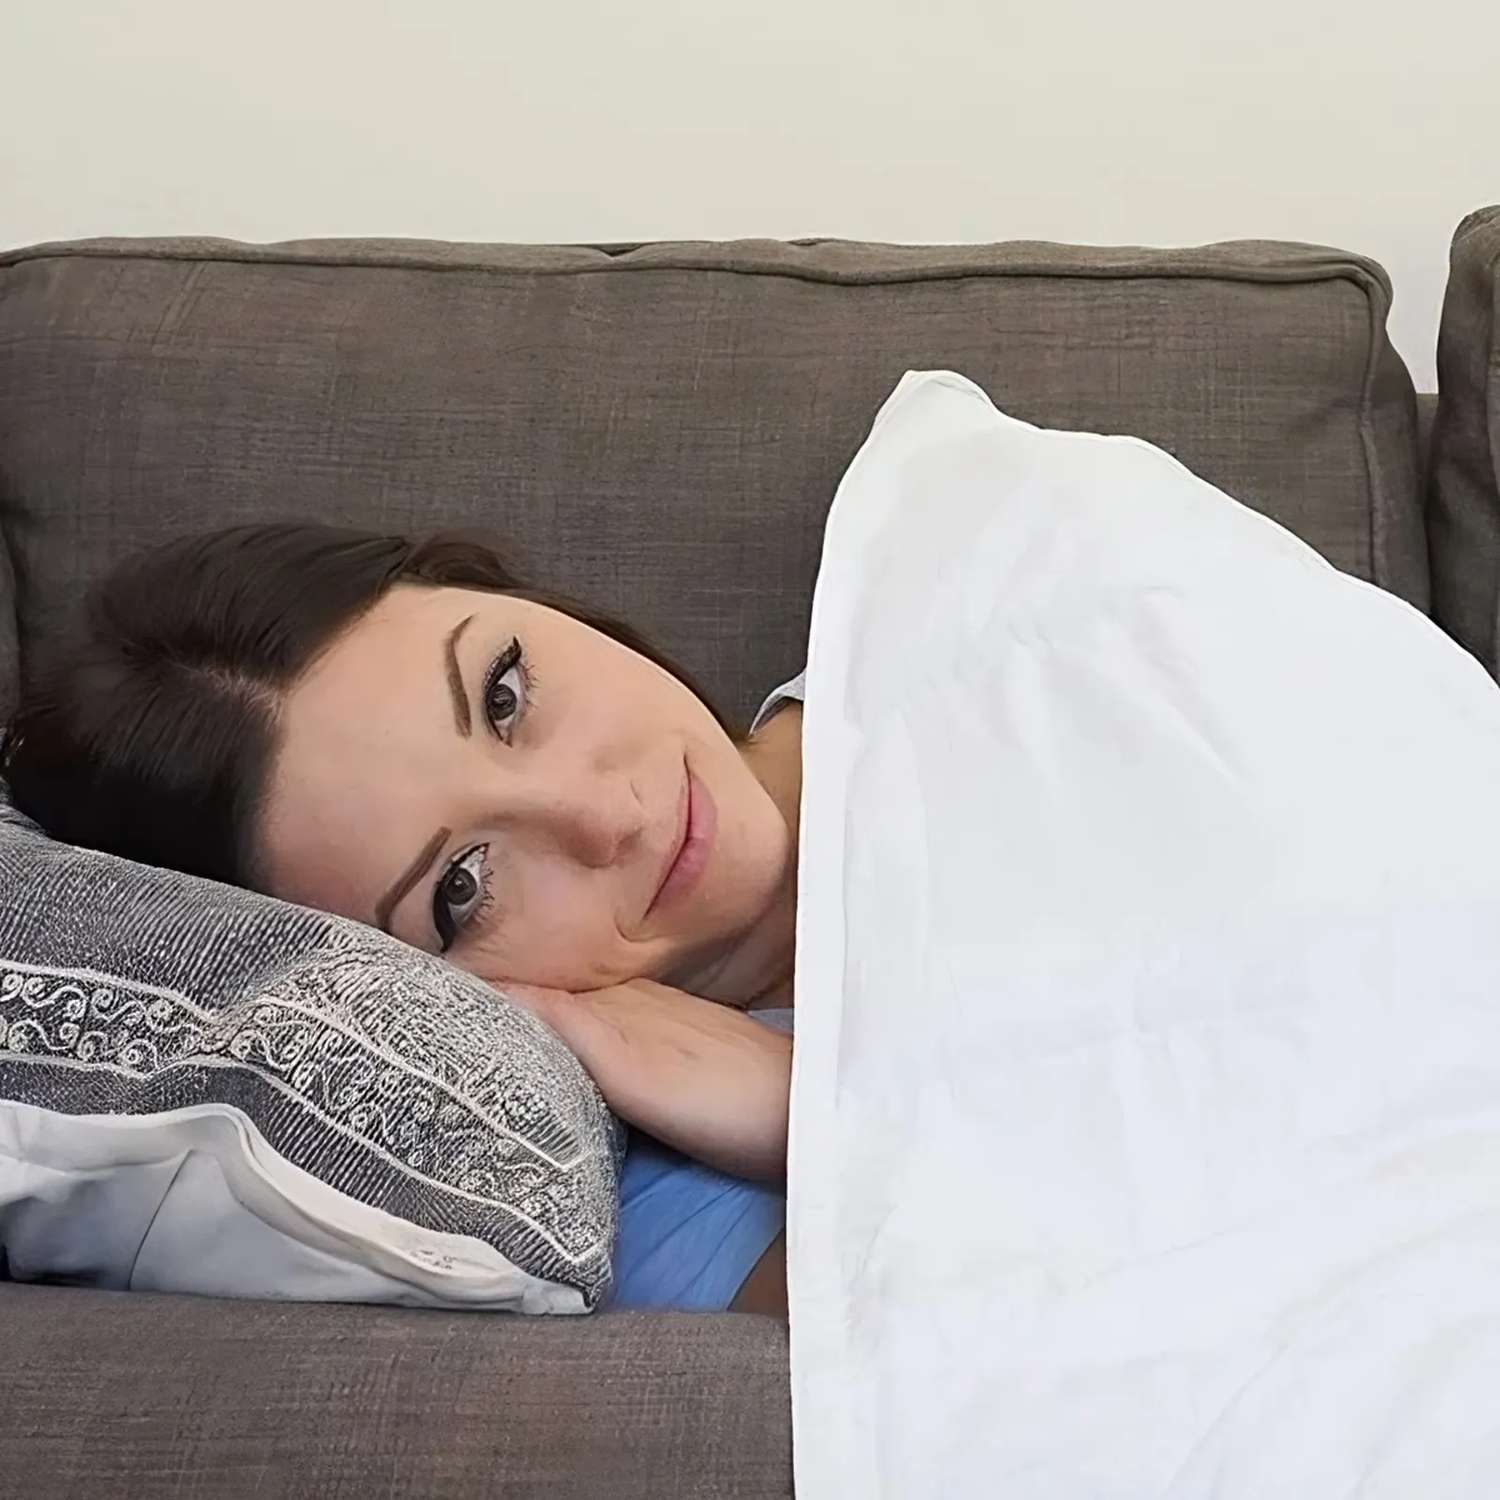 Weighted blankets are celebrated as a medication-free way to manage stress and anxiety